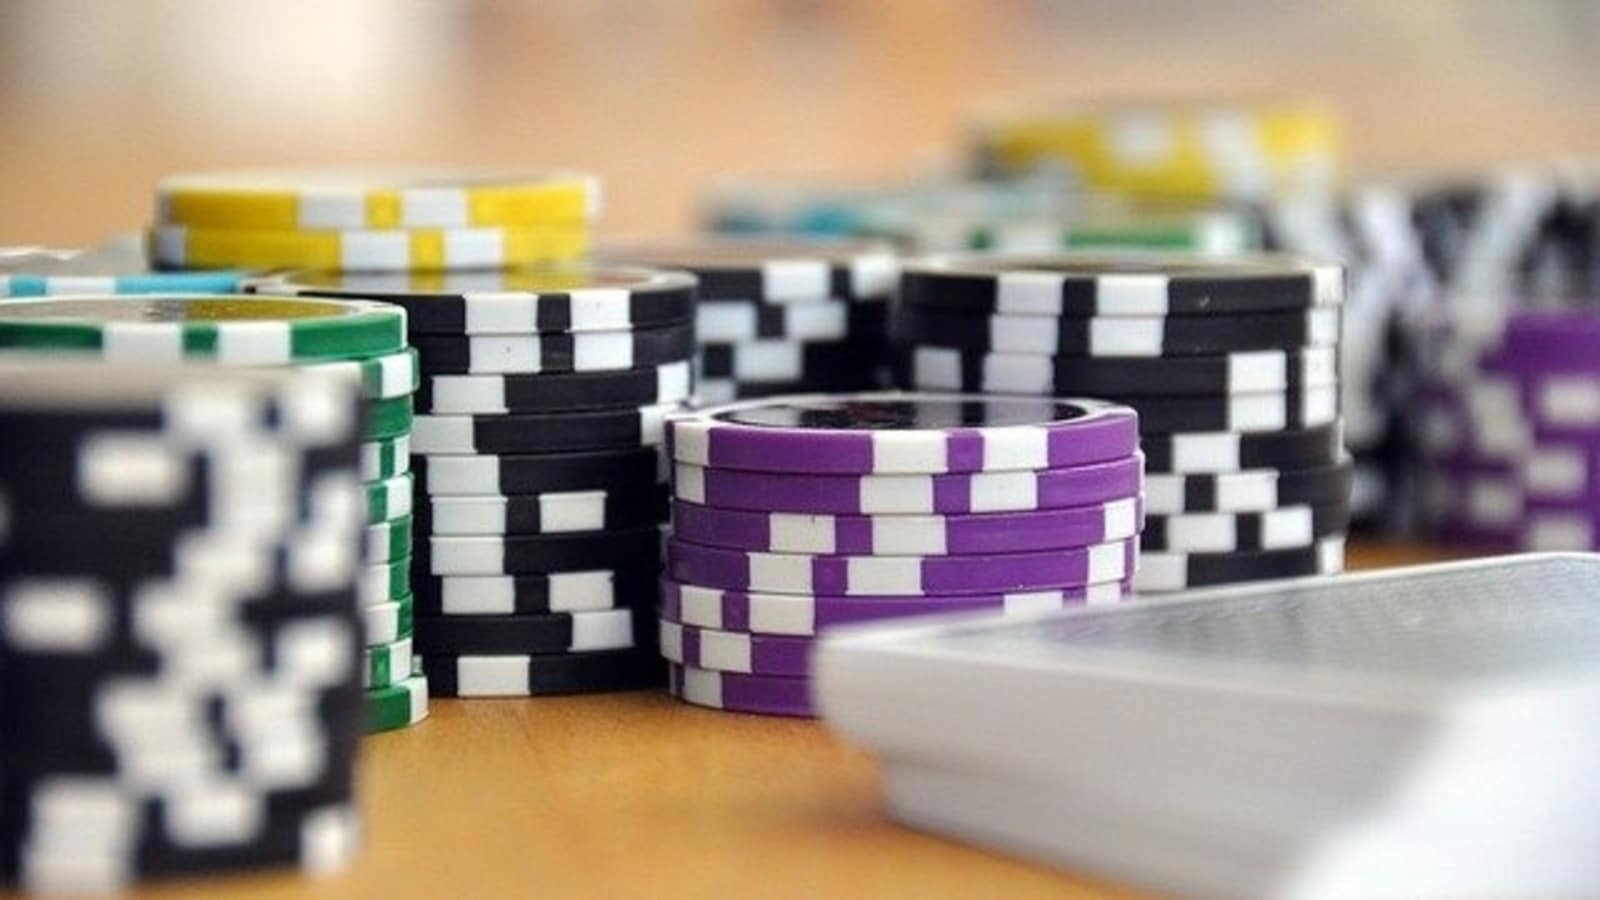 10 Reasons Why Having An Excellent Strategies for Responsible Gambling in Azerbaijan: Tips and resources for maintaining control. Is Not Enough